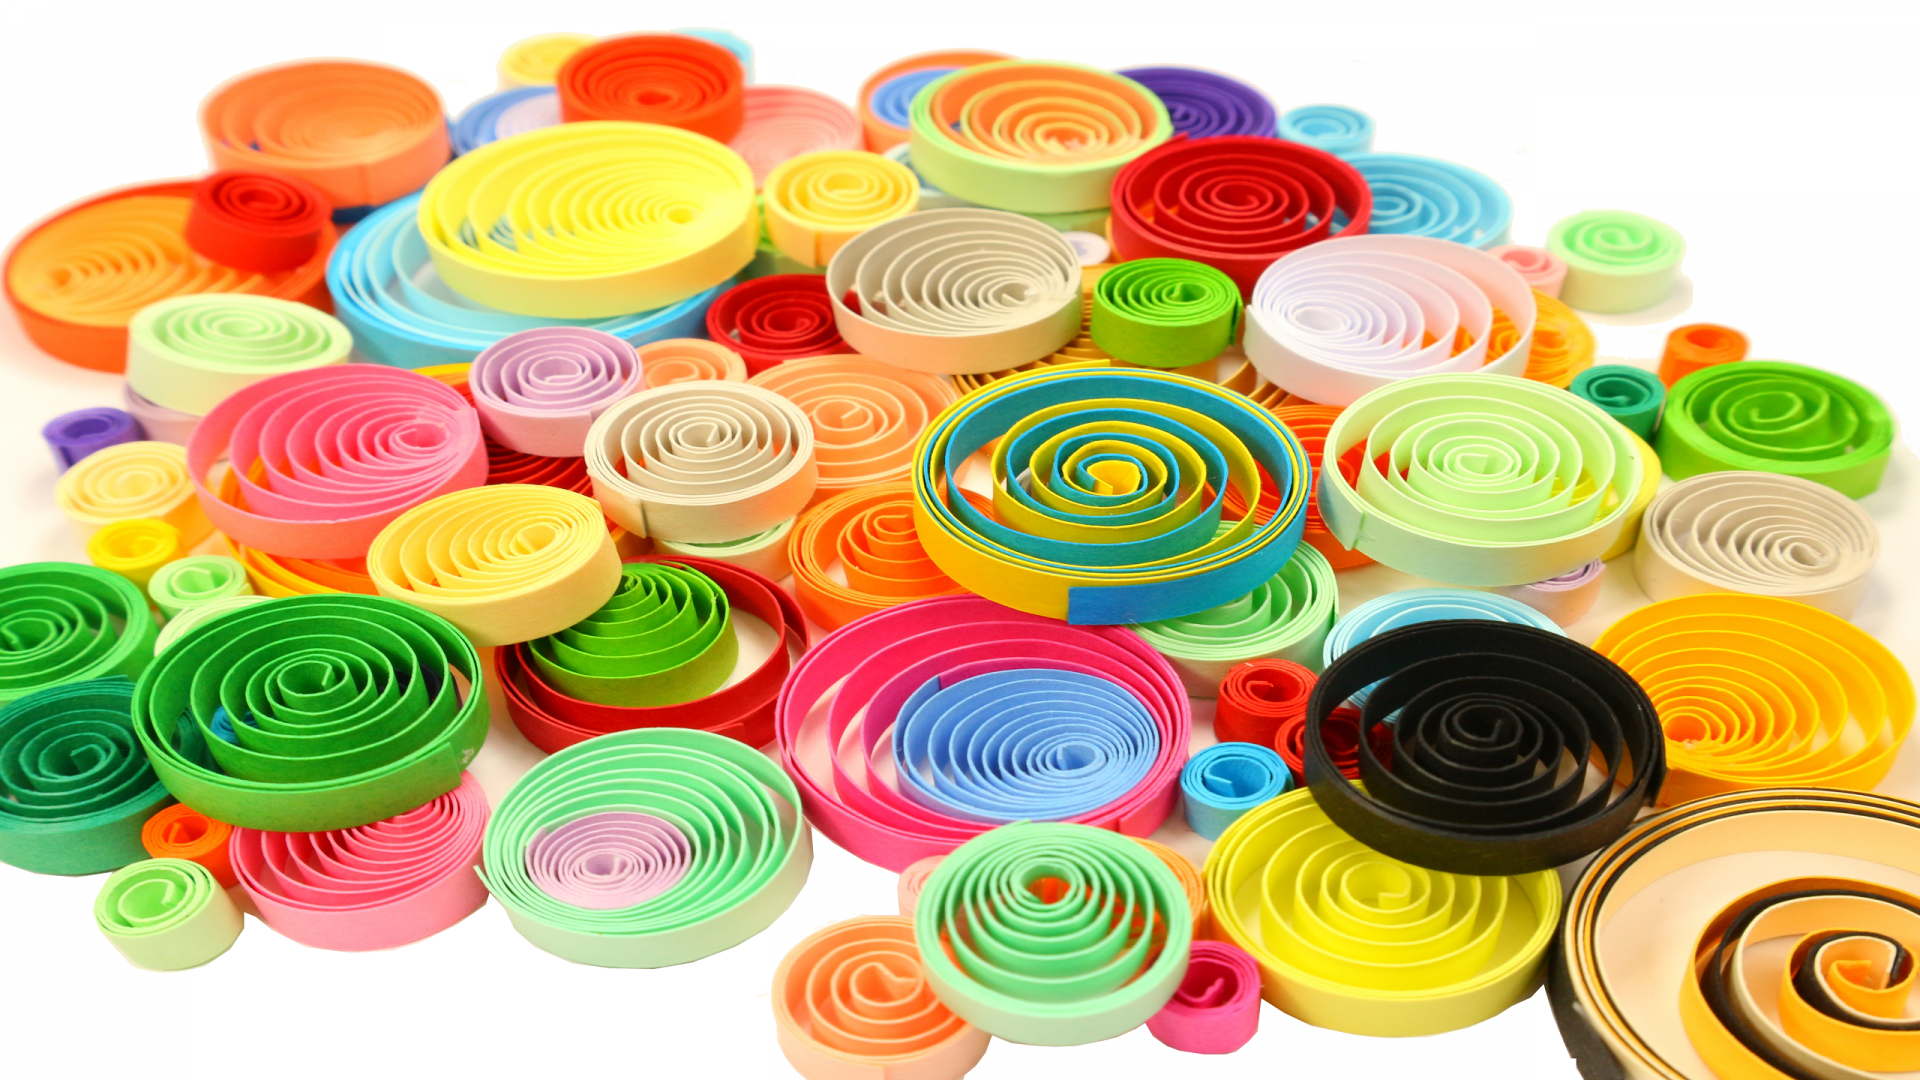 Quilling facile youtube papier roule spirale paperolles quilled curling